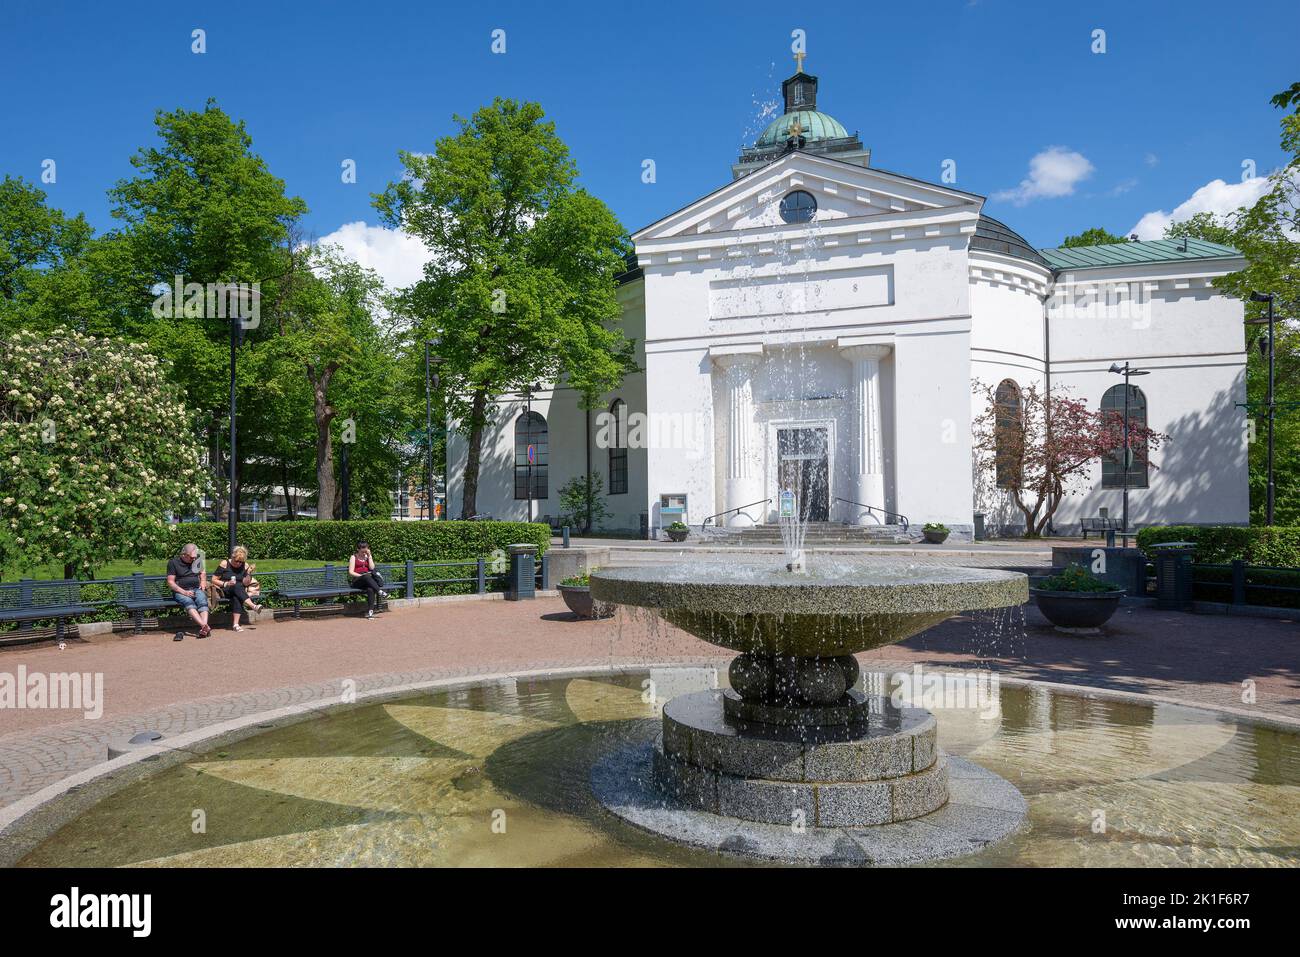 HAMEENLINNA, FINLAND - JUNE 10, 2017: City fountain against the background of an old Lutheran church on a sunny June day Stock Photo